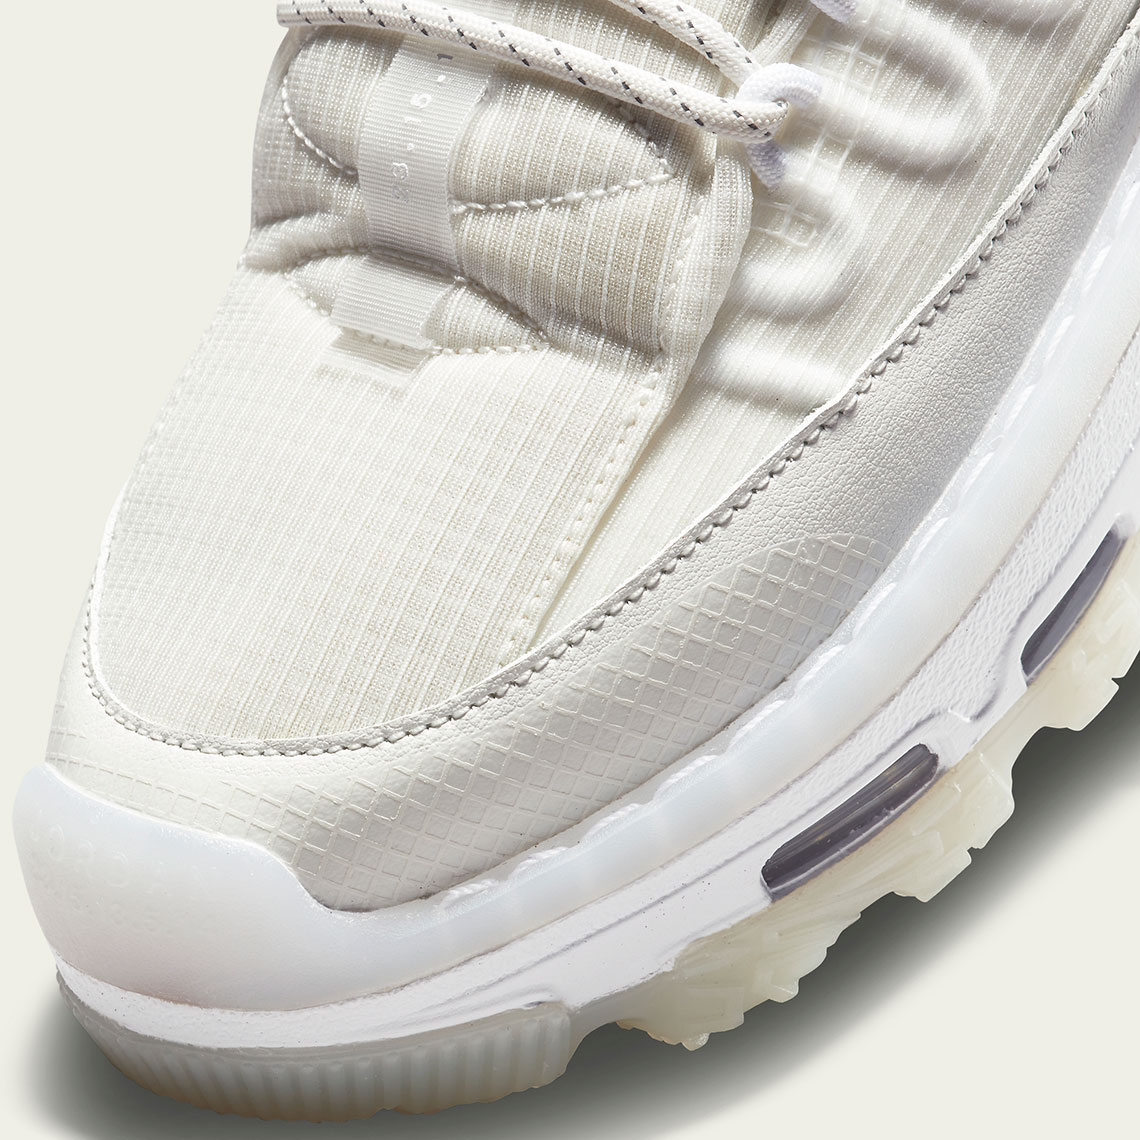 The lateral side of the Air Jordan 11 CMFT Low Wmns Sail Ct4539 100 7